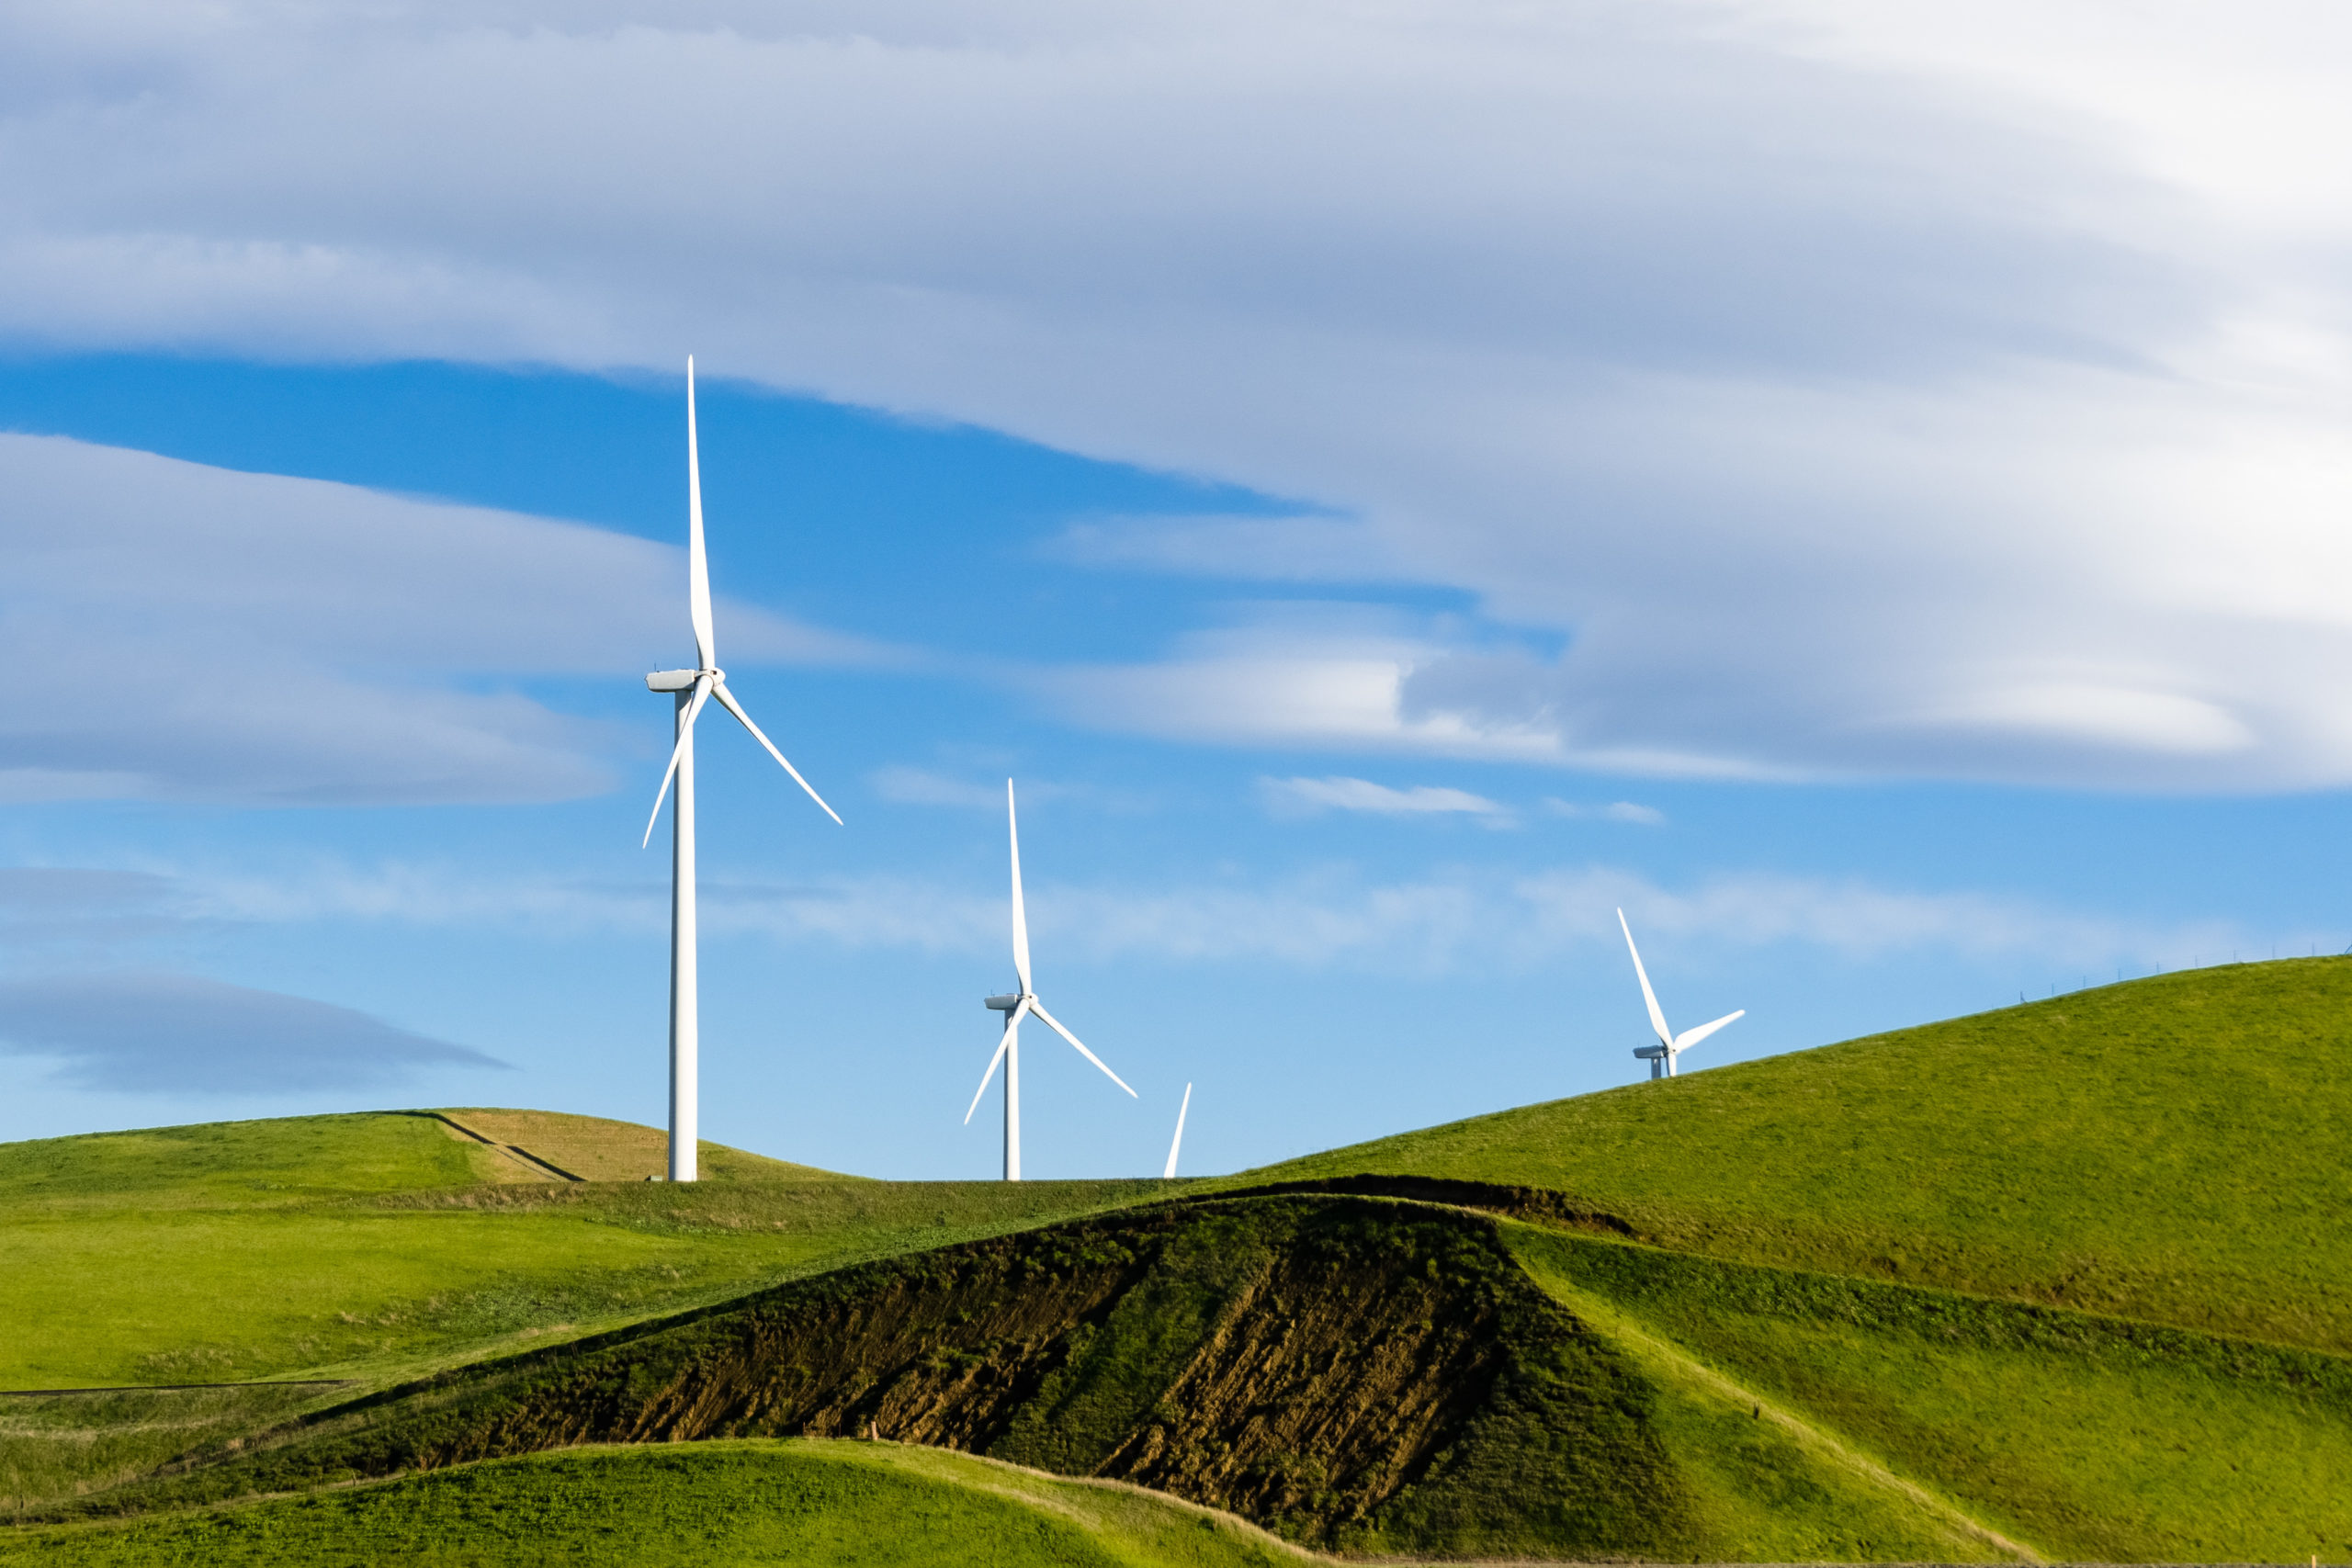 Image of Windmills in Livermore